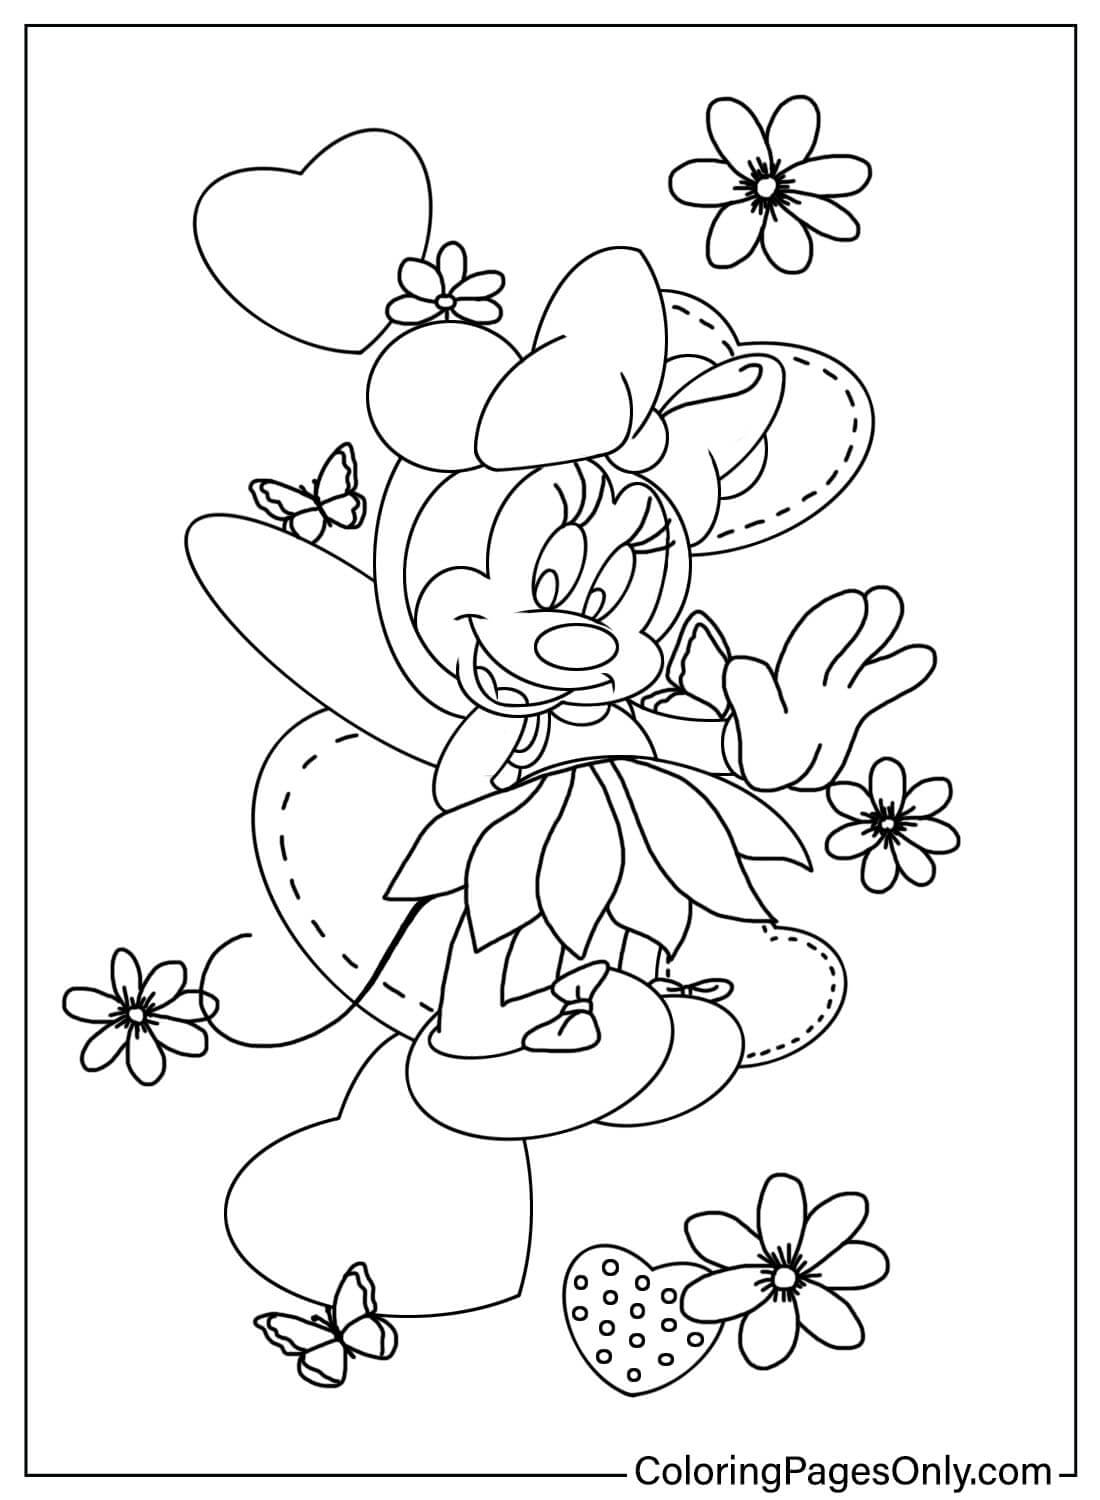 Beautiful Minnie Mouse Coloring Page from Minnie Mouse